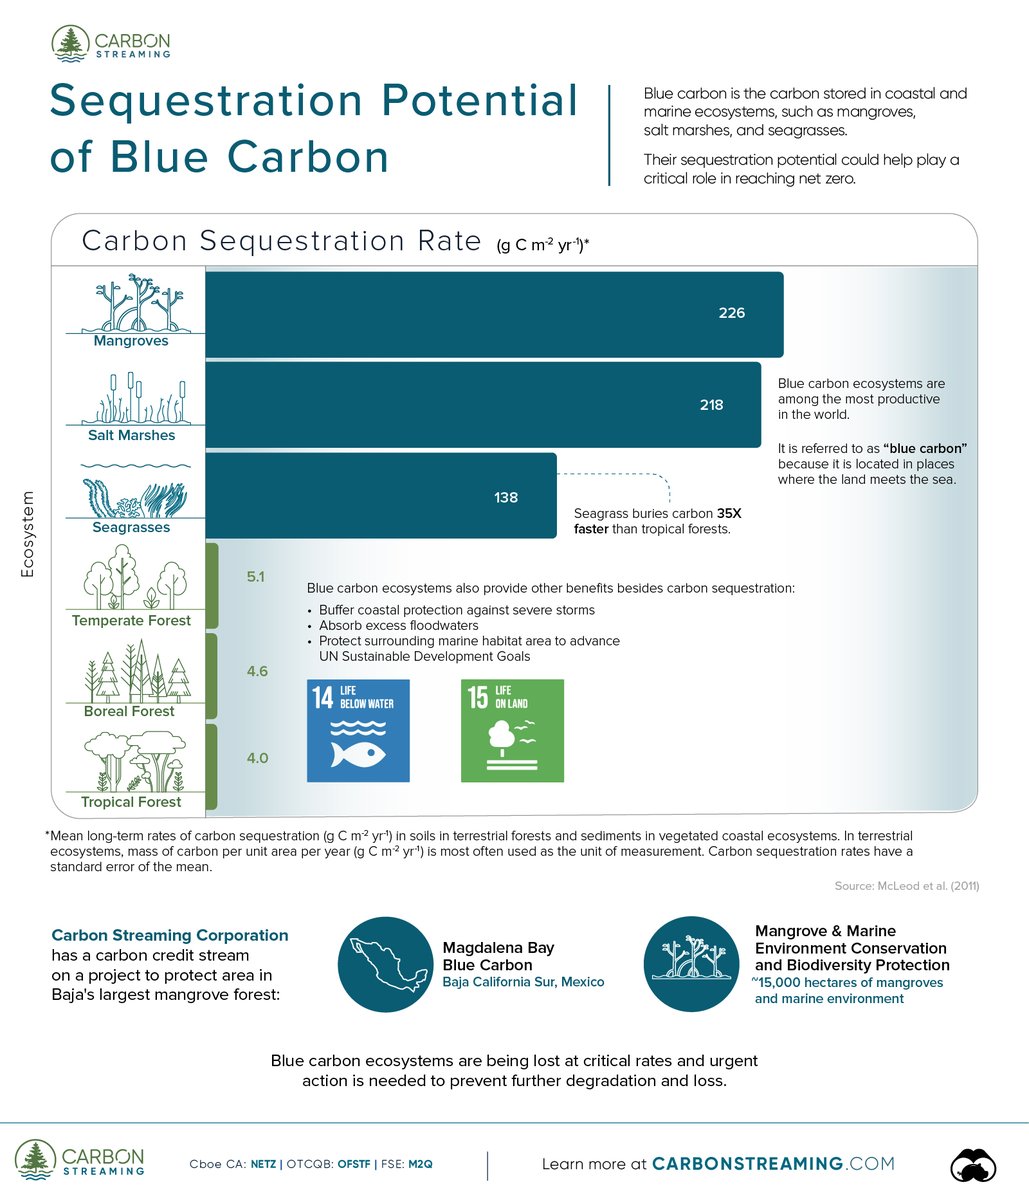 Blue carbon ecosystems are among the most productive in the world. Teaming up with @VisualCap, we’re spotlighting the impressive carbon sequestration rates of these ecosystems. Learn more about our Magdalena Bay Blue Carbon Project here: carbonstreaming.com/project/magdal…